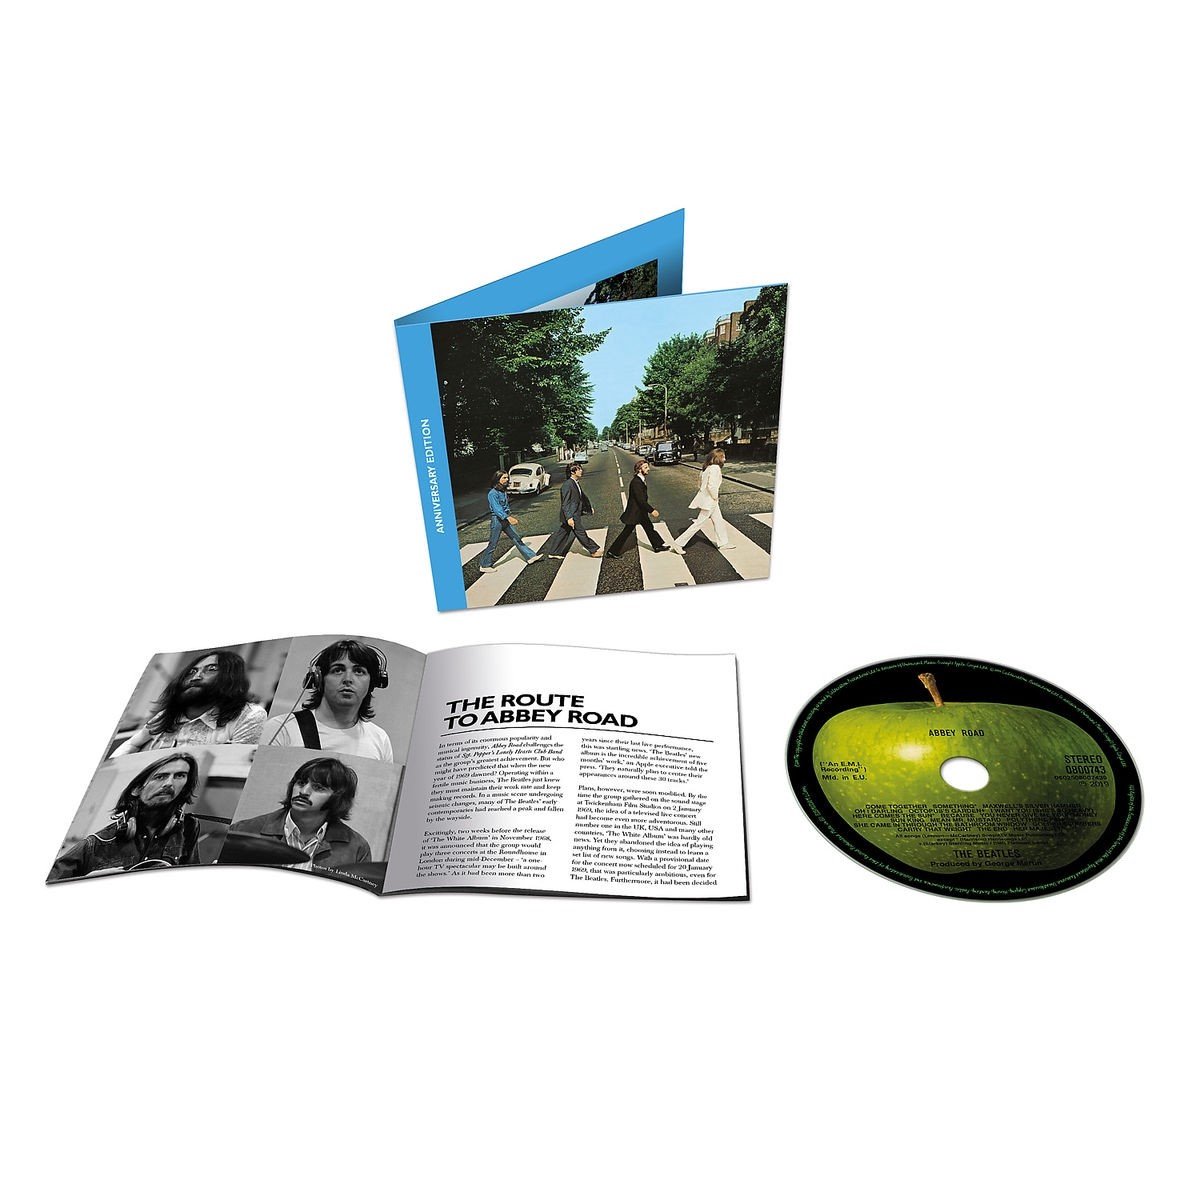 The Beatles - Abbey Road (CD) (50th Anniversary Edition) - The Beatles